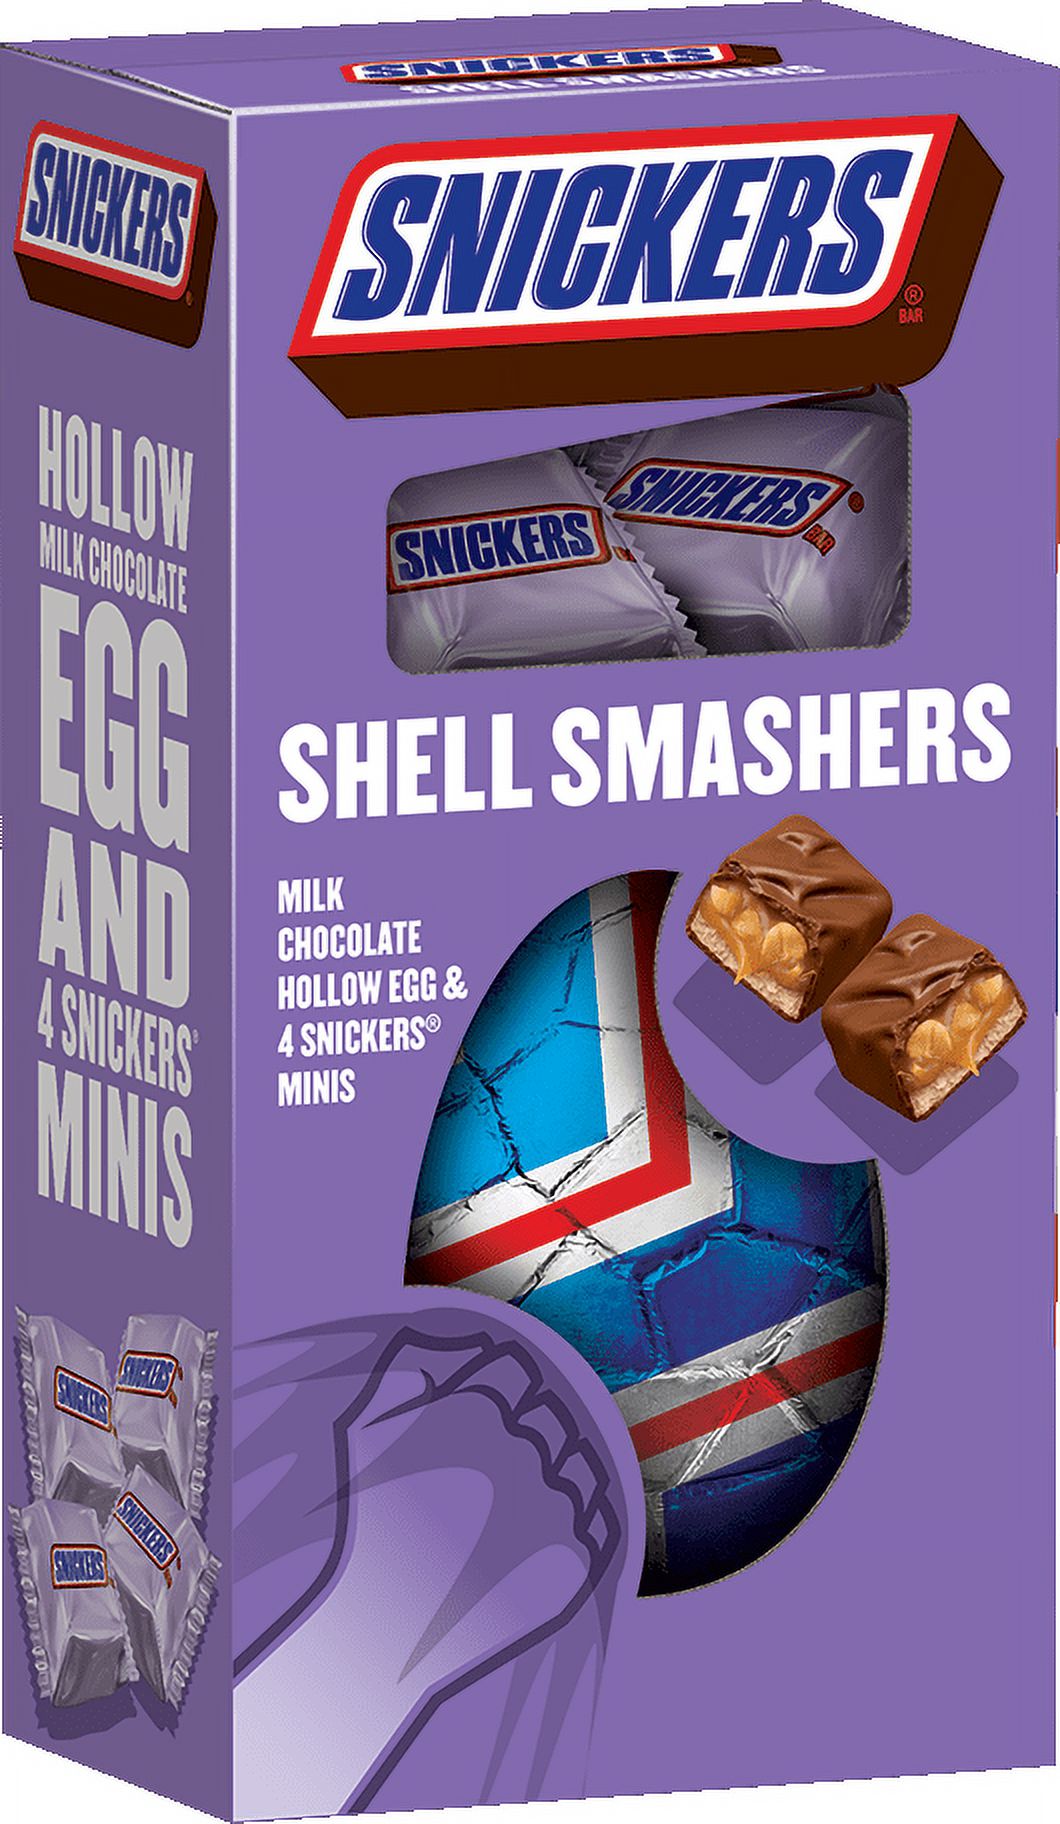 SNICKERS Shell Smashers Easter Chocolate Candy, 4.62-Ounce Box - image 1 of 5